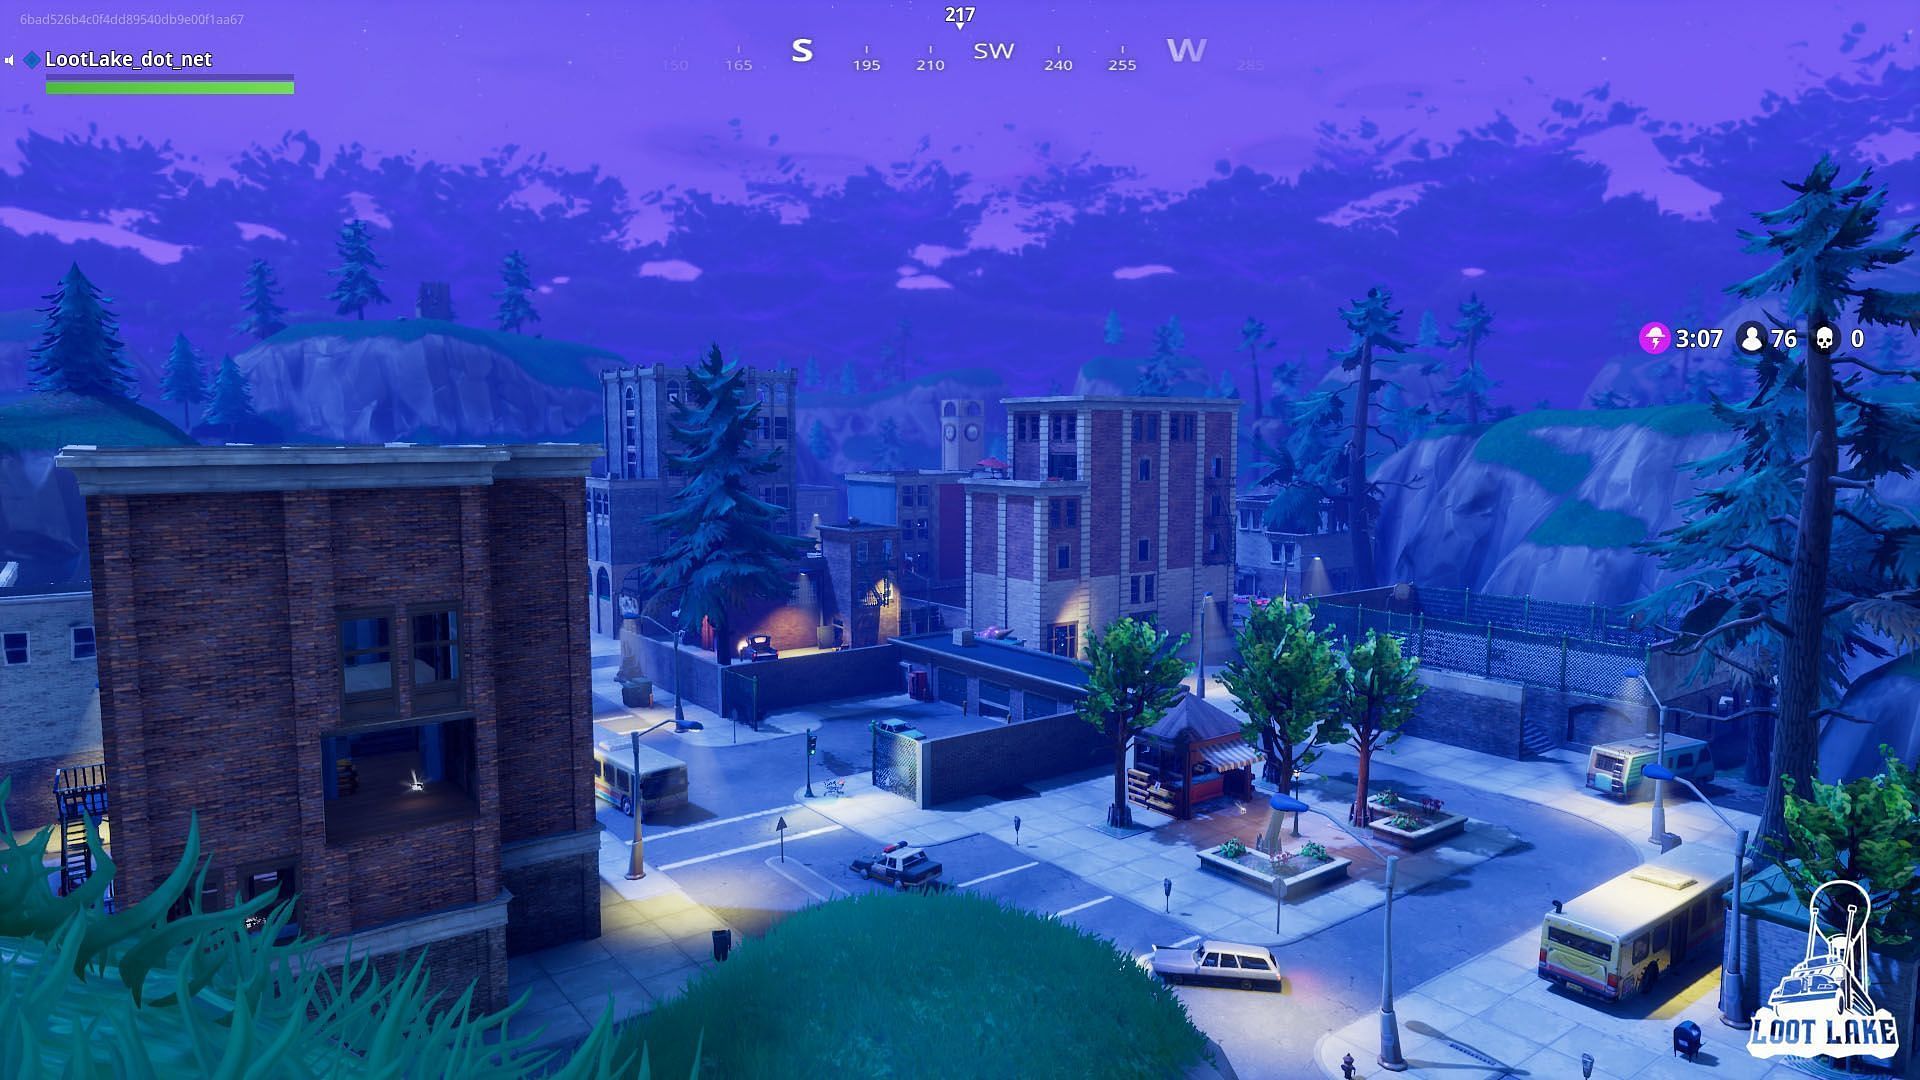 Tilted Towers was not available on the OG map (Image via Epic Games)